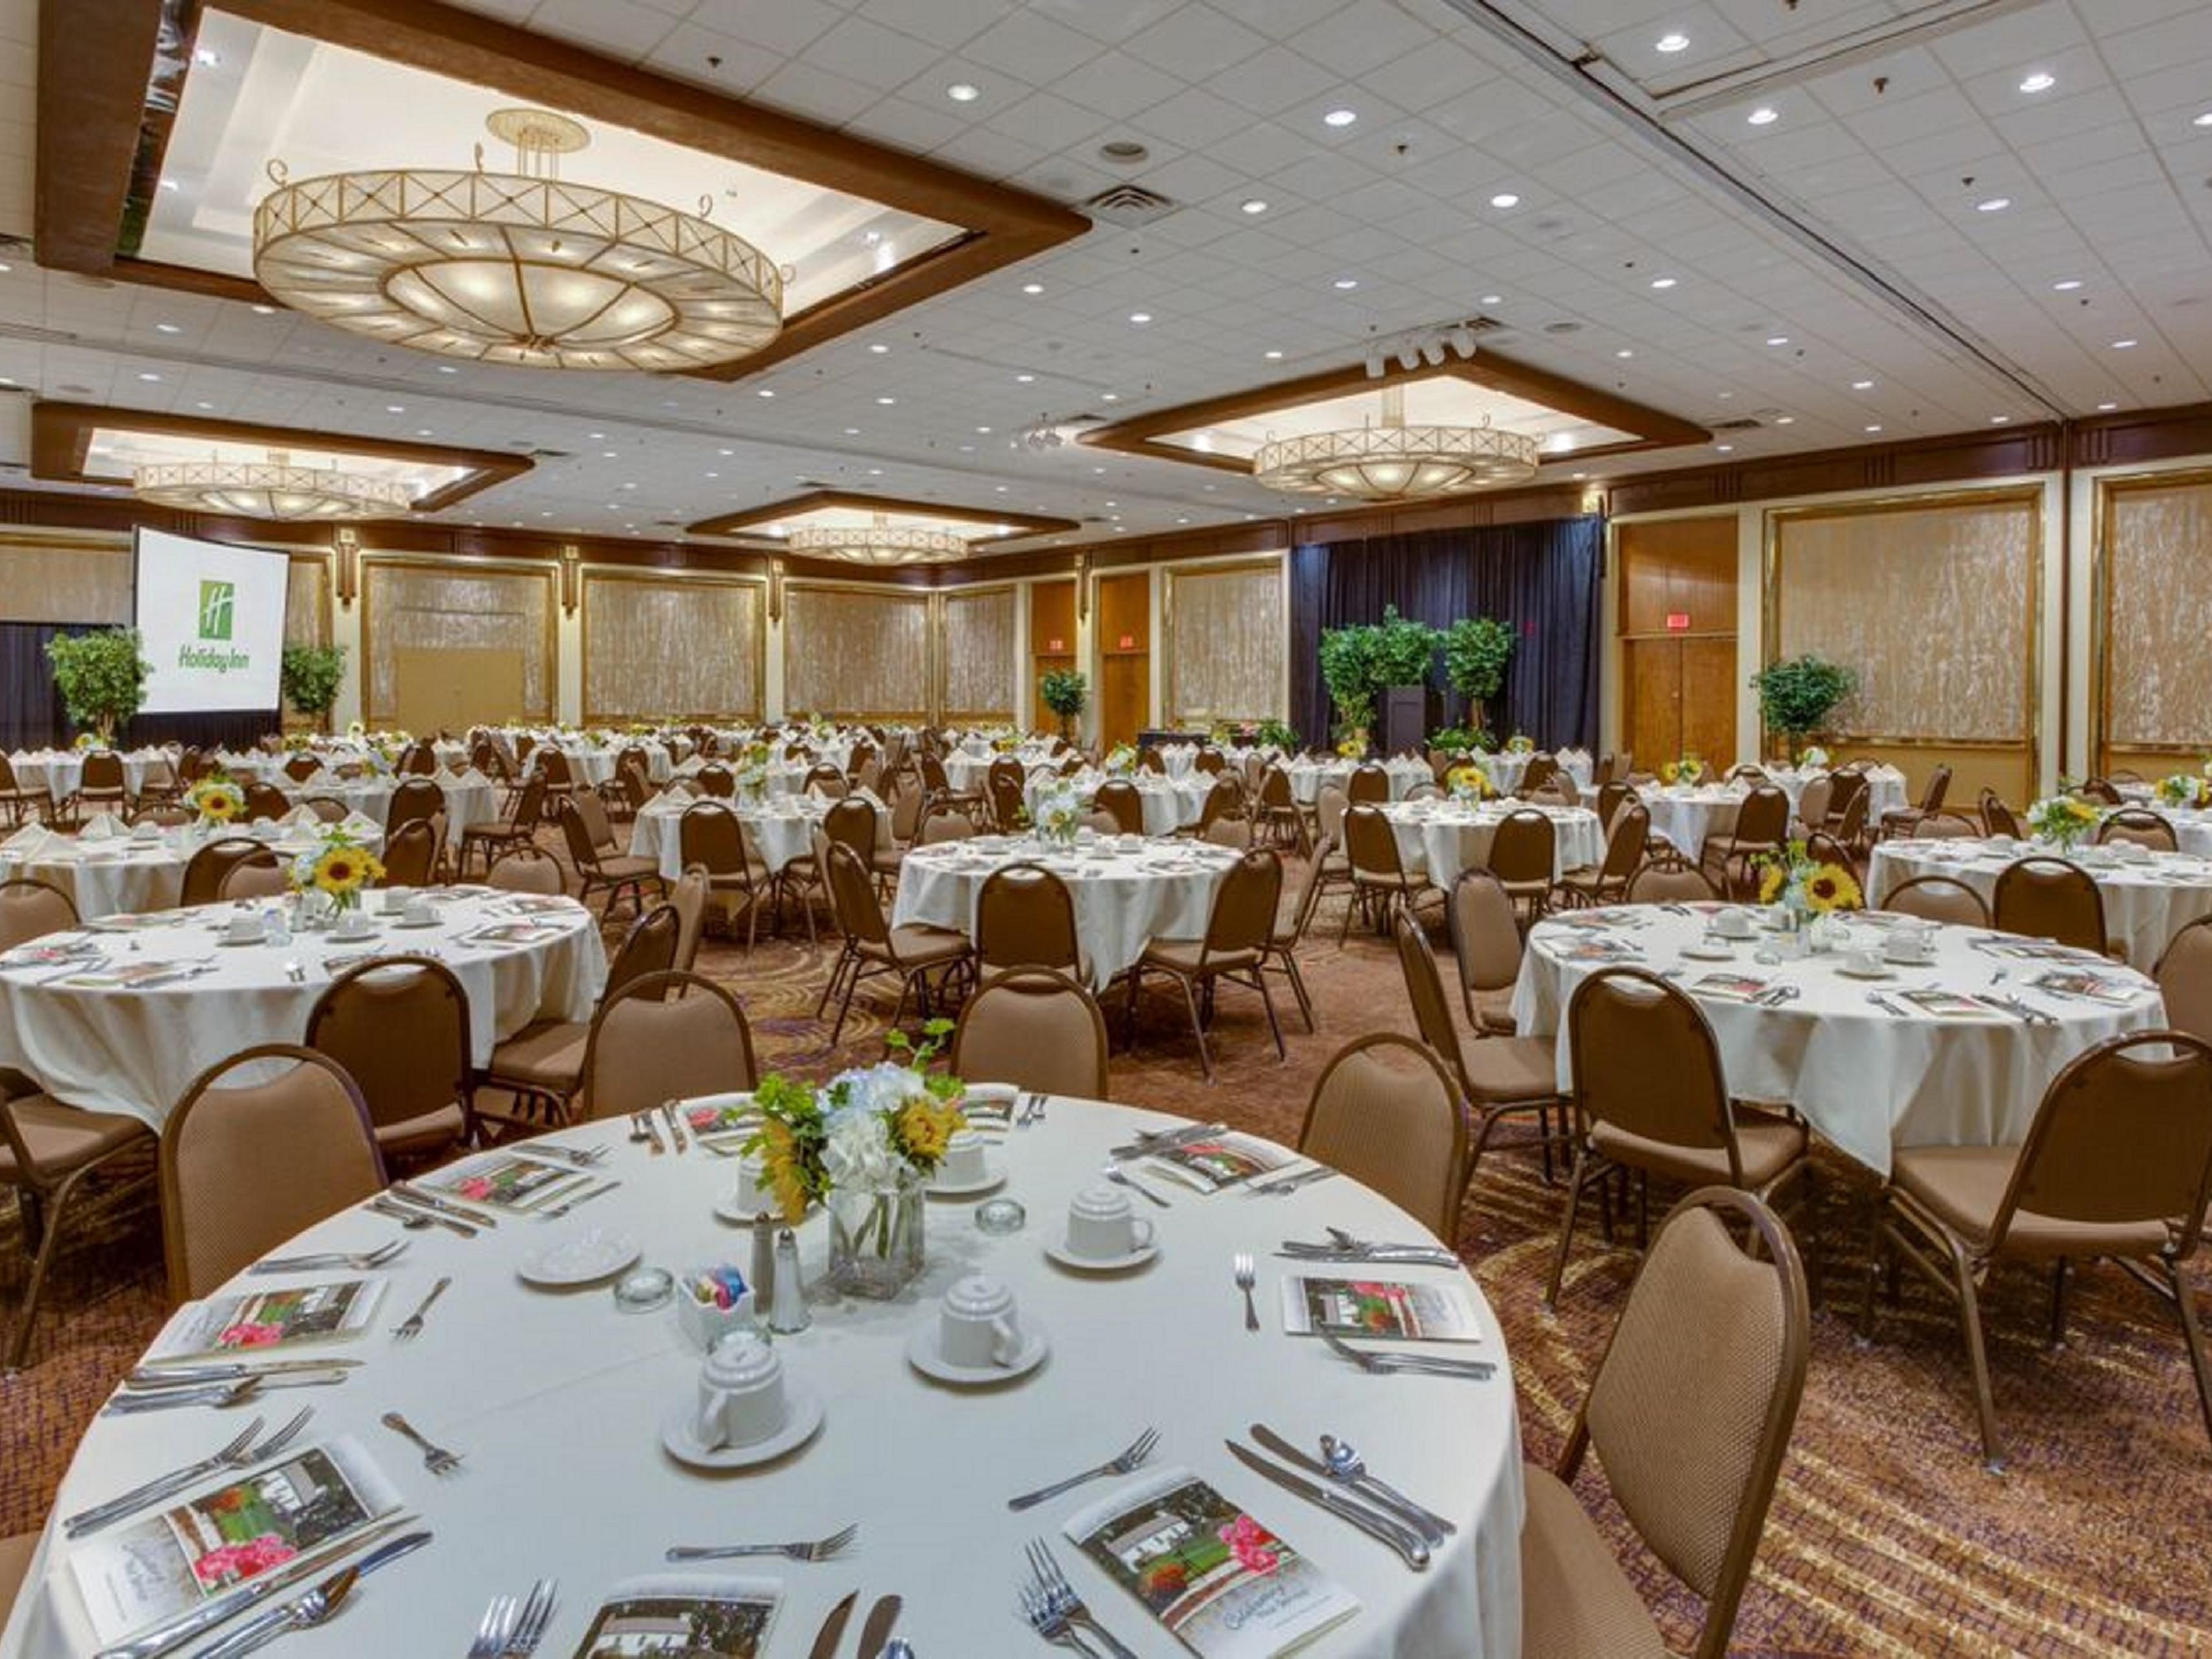 Whether you’re planning a major convention or an intimate event, let the professionals at the Holiday Inn Executive Center dedicate their experience and hospitality to work for you. 